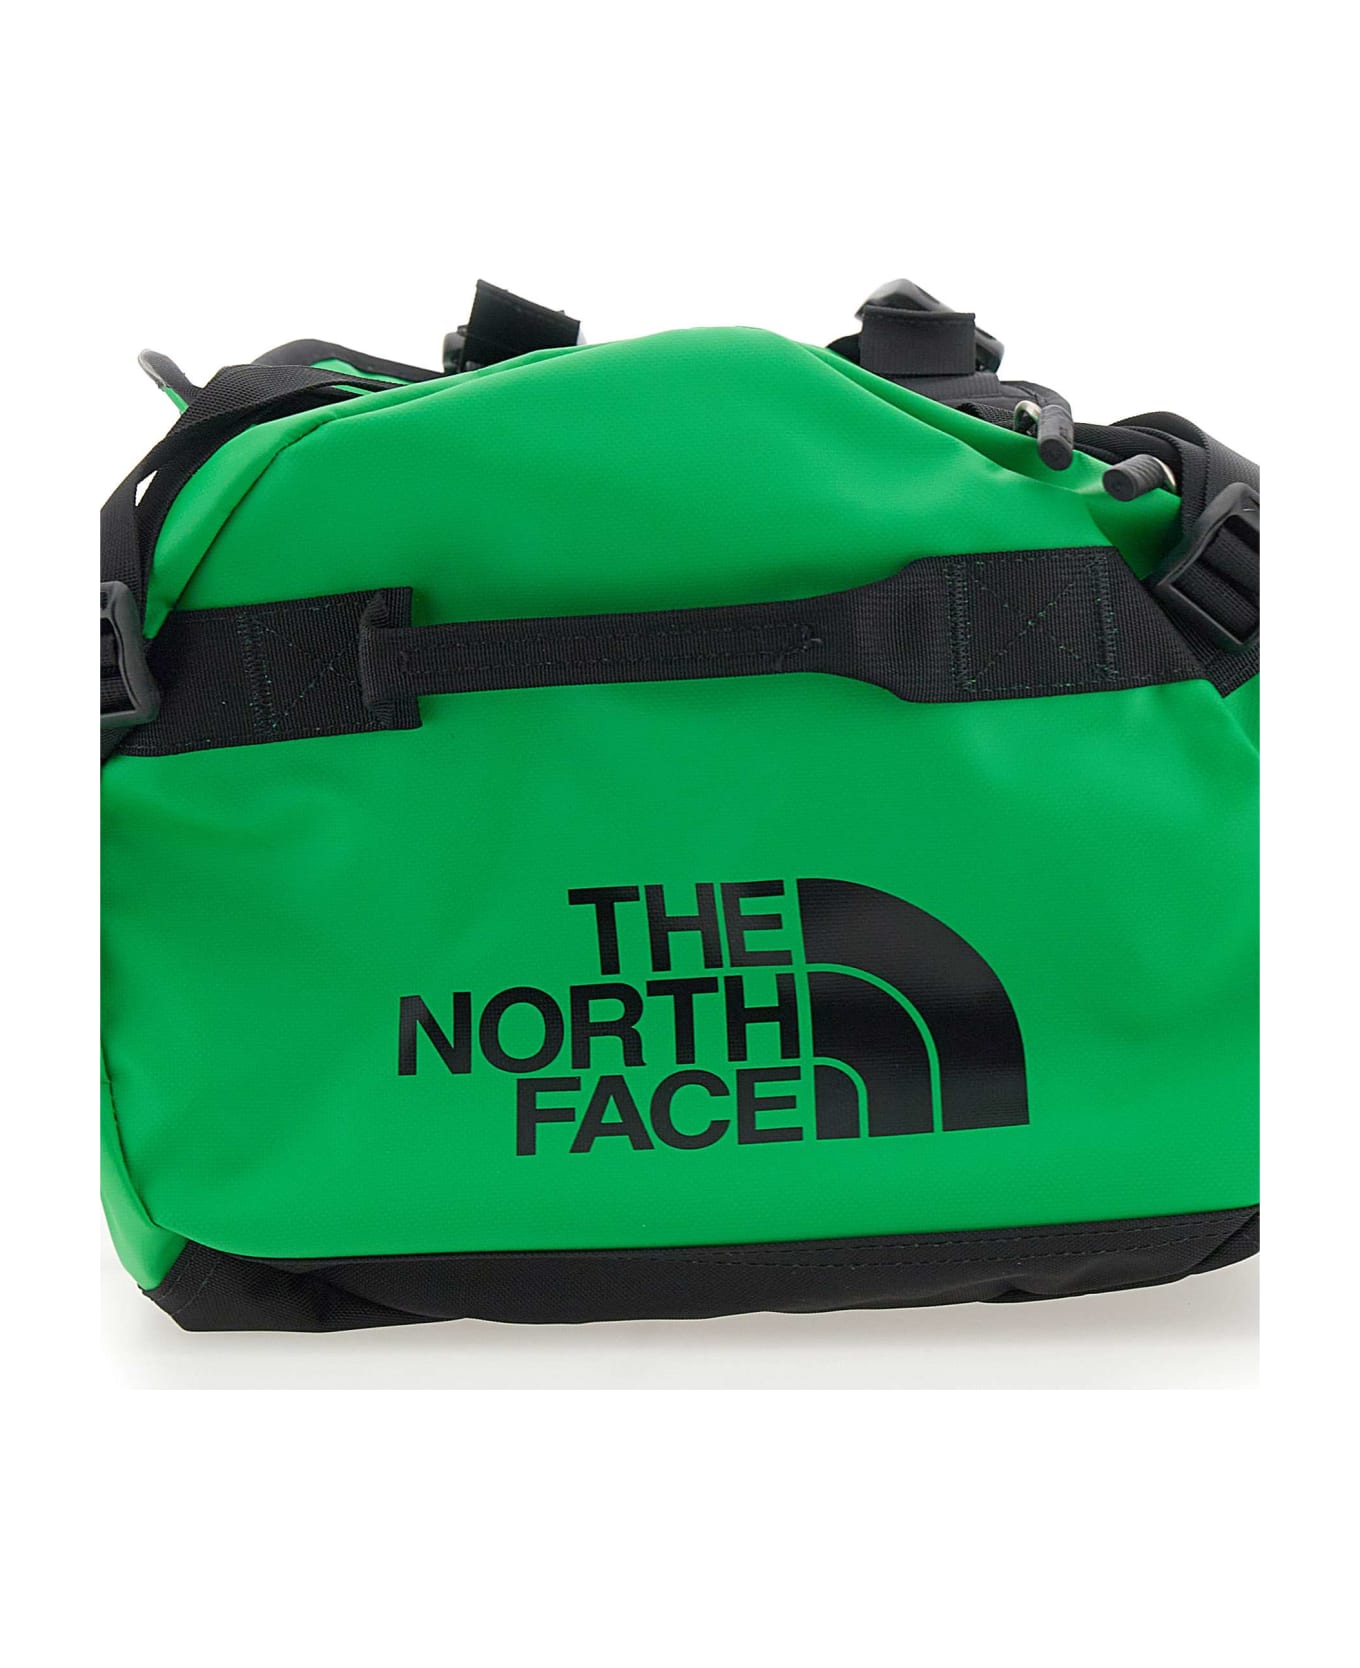 The North Face "base Camp Duffel" Travel Bag - black/green トラベルバッグ